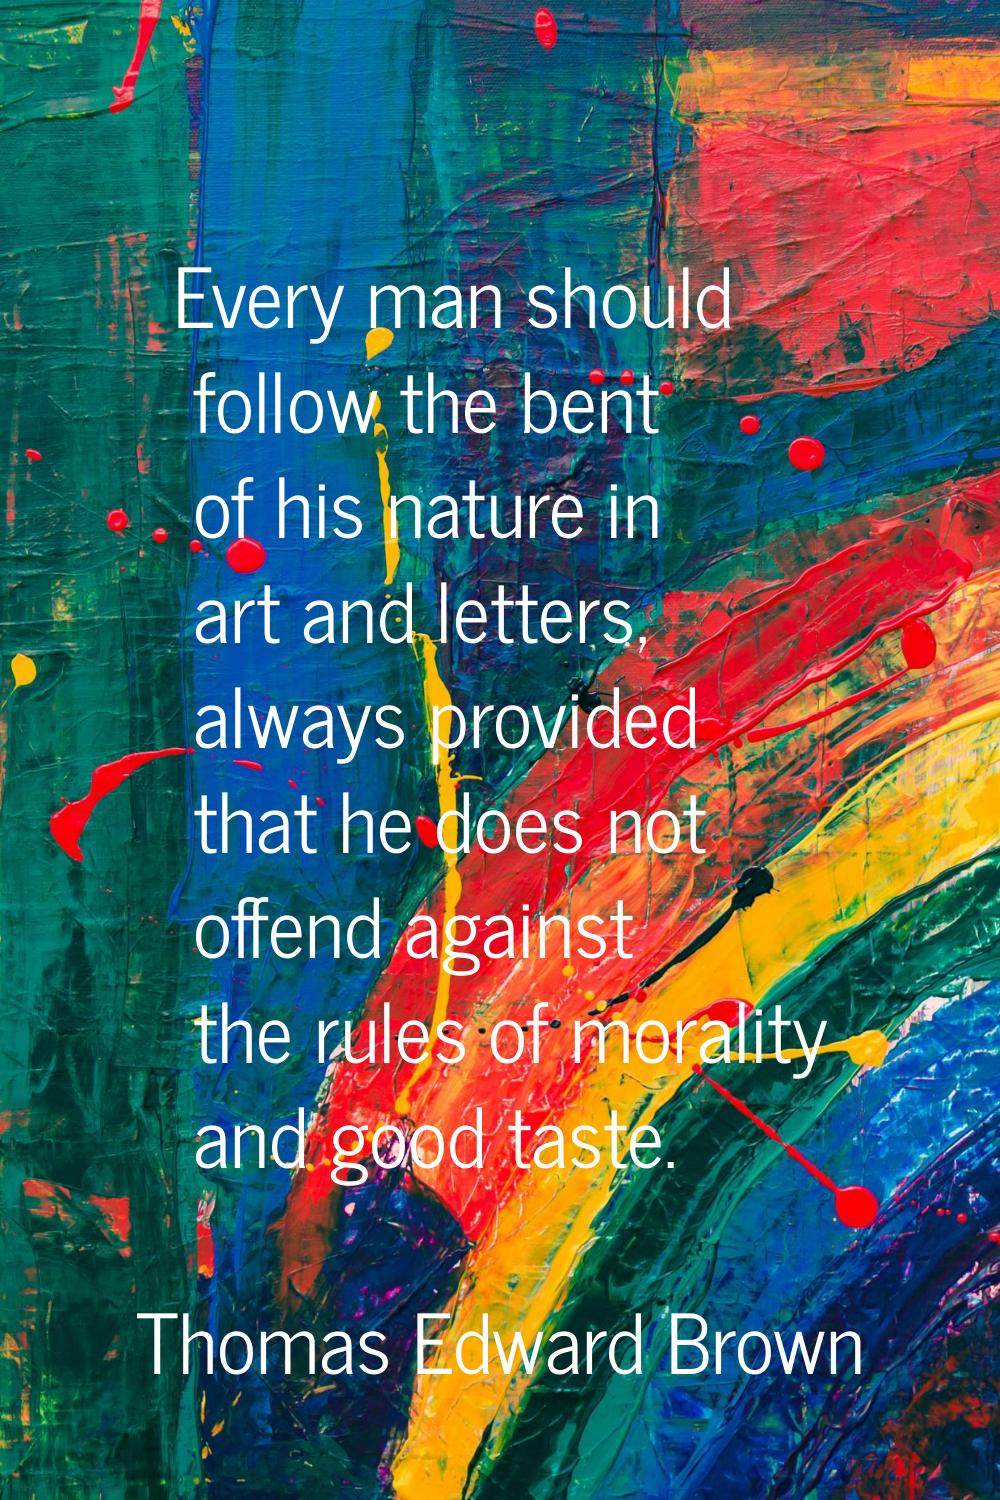 Every man should follow the bent of his nature in art and letters, always provided that he does not